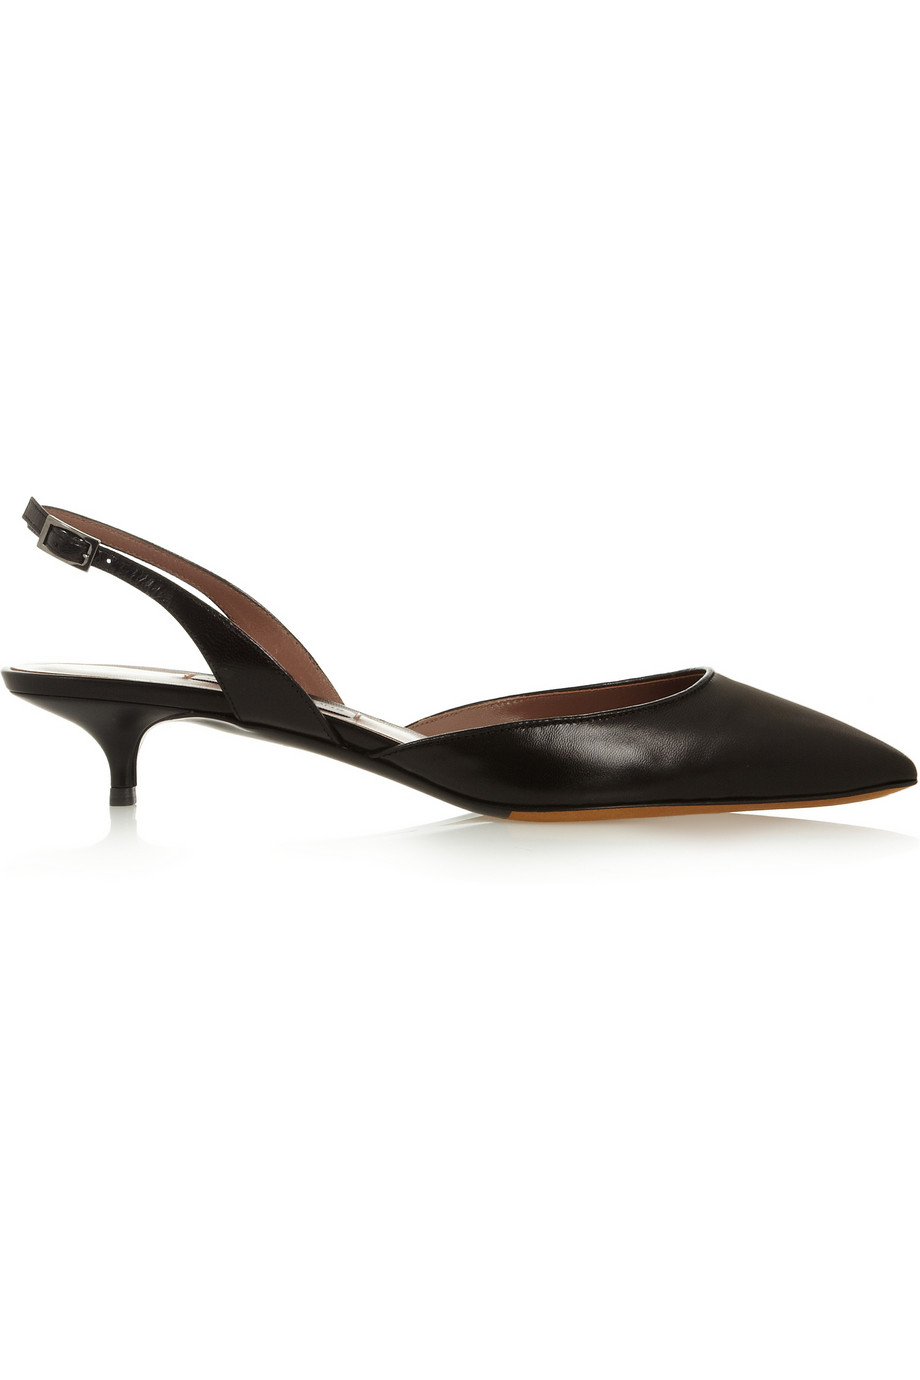 Tabitha Simmons Lily Leather Slingback Pumps In Black Lyst 